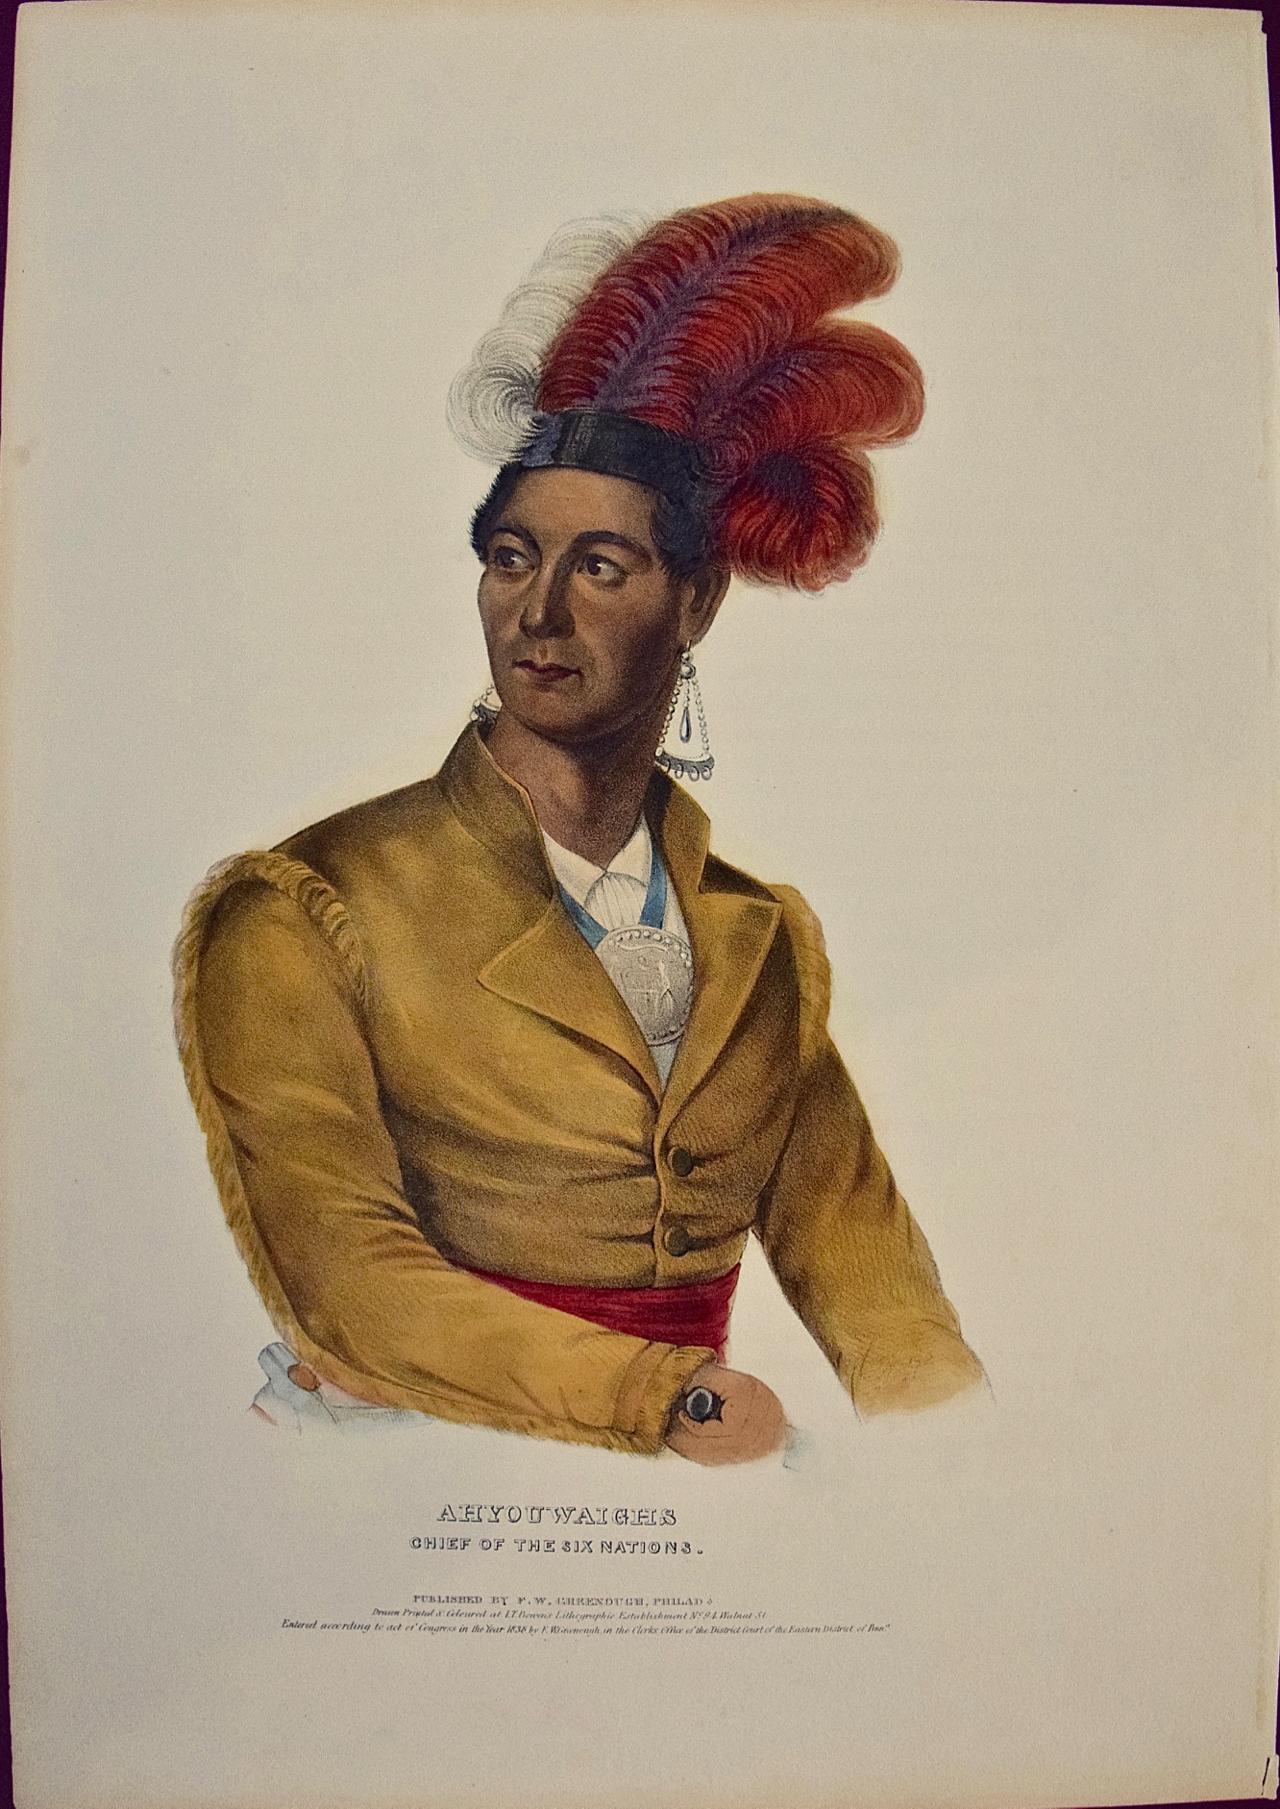 McKenney & Hall Print - Ahyouwaighs, Chief of Six Nations: Hand-colored McKenney Folio-sized Lithograph